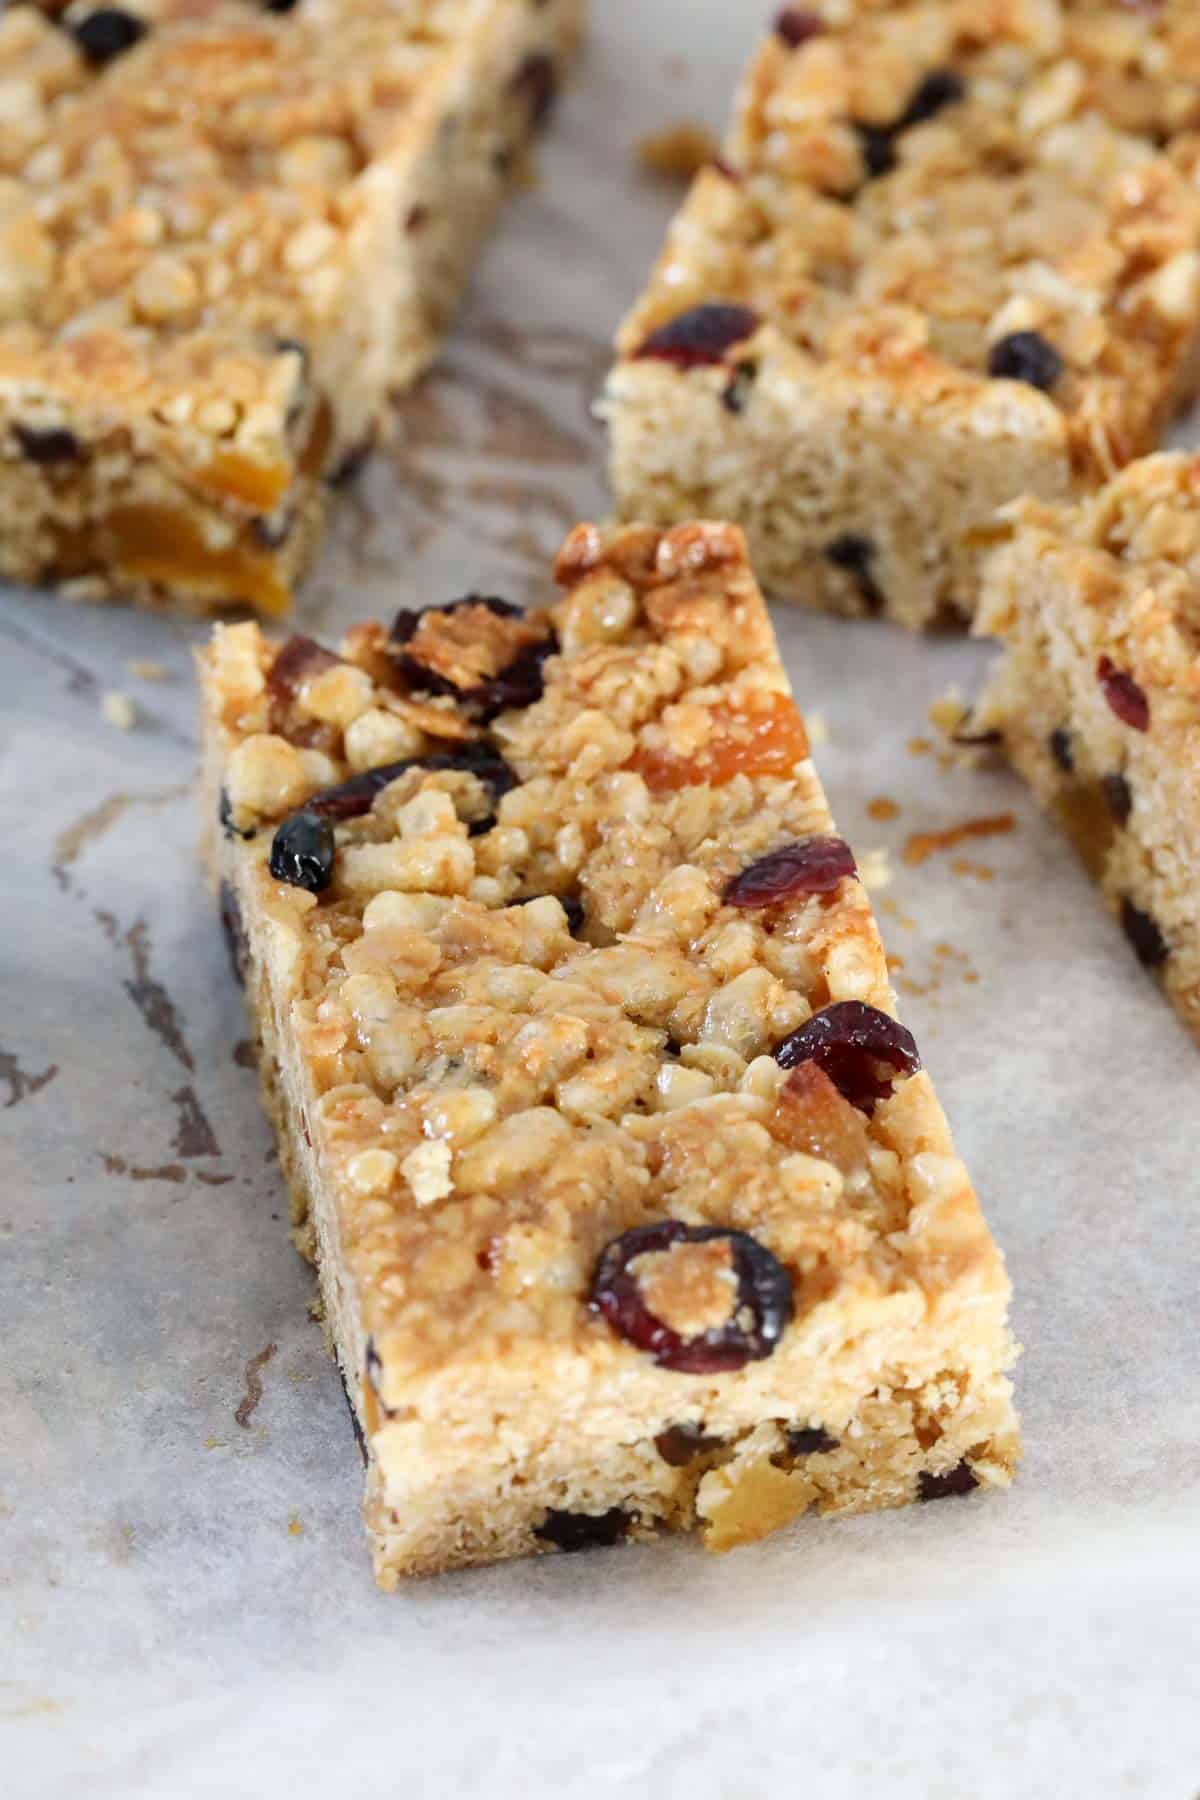 Close up of muesli bars made with sultanas and dried apricot